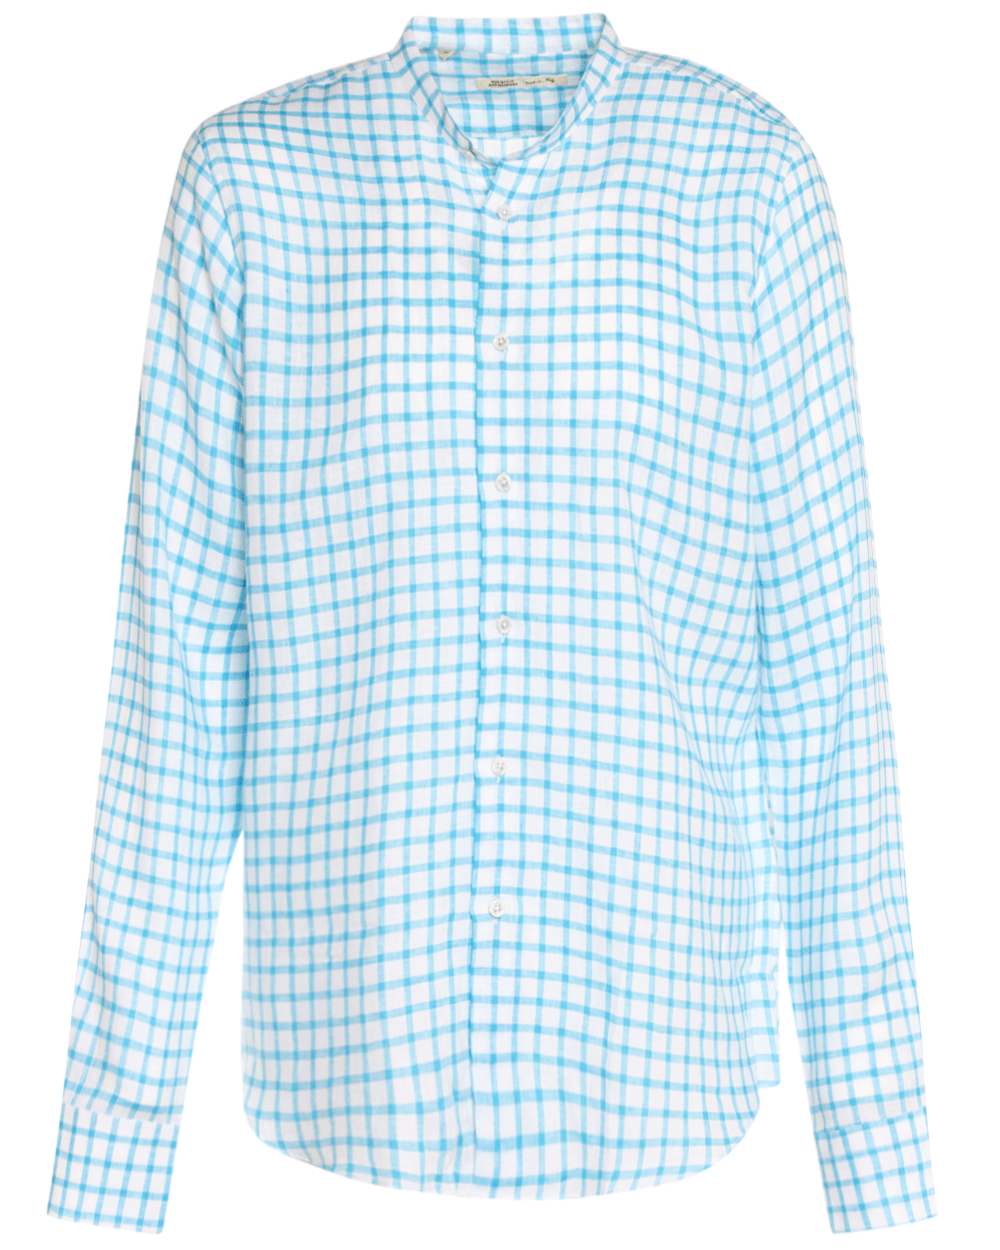 Blue and White Linen Checked Sportshirt